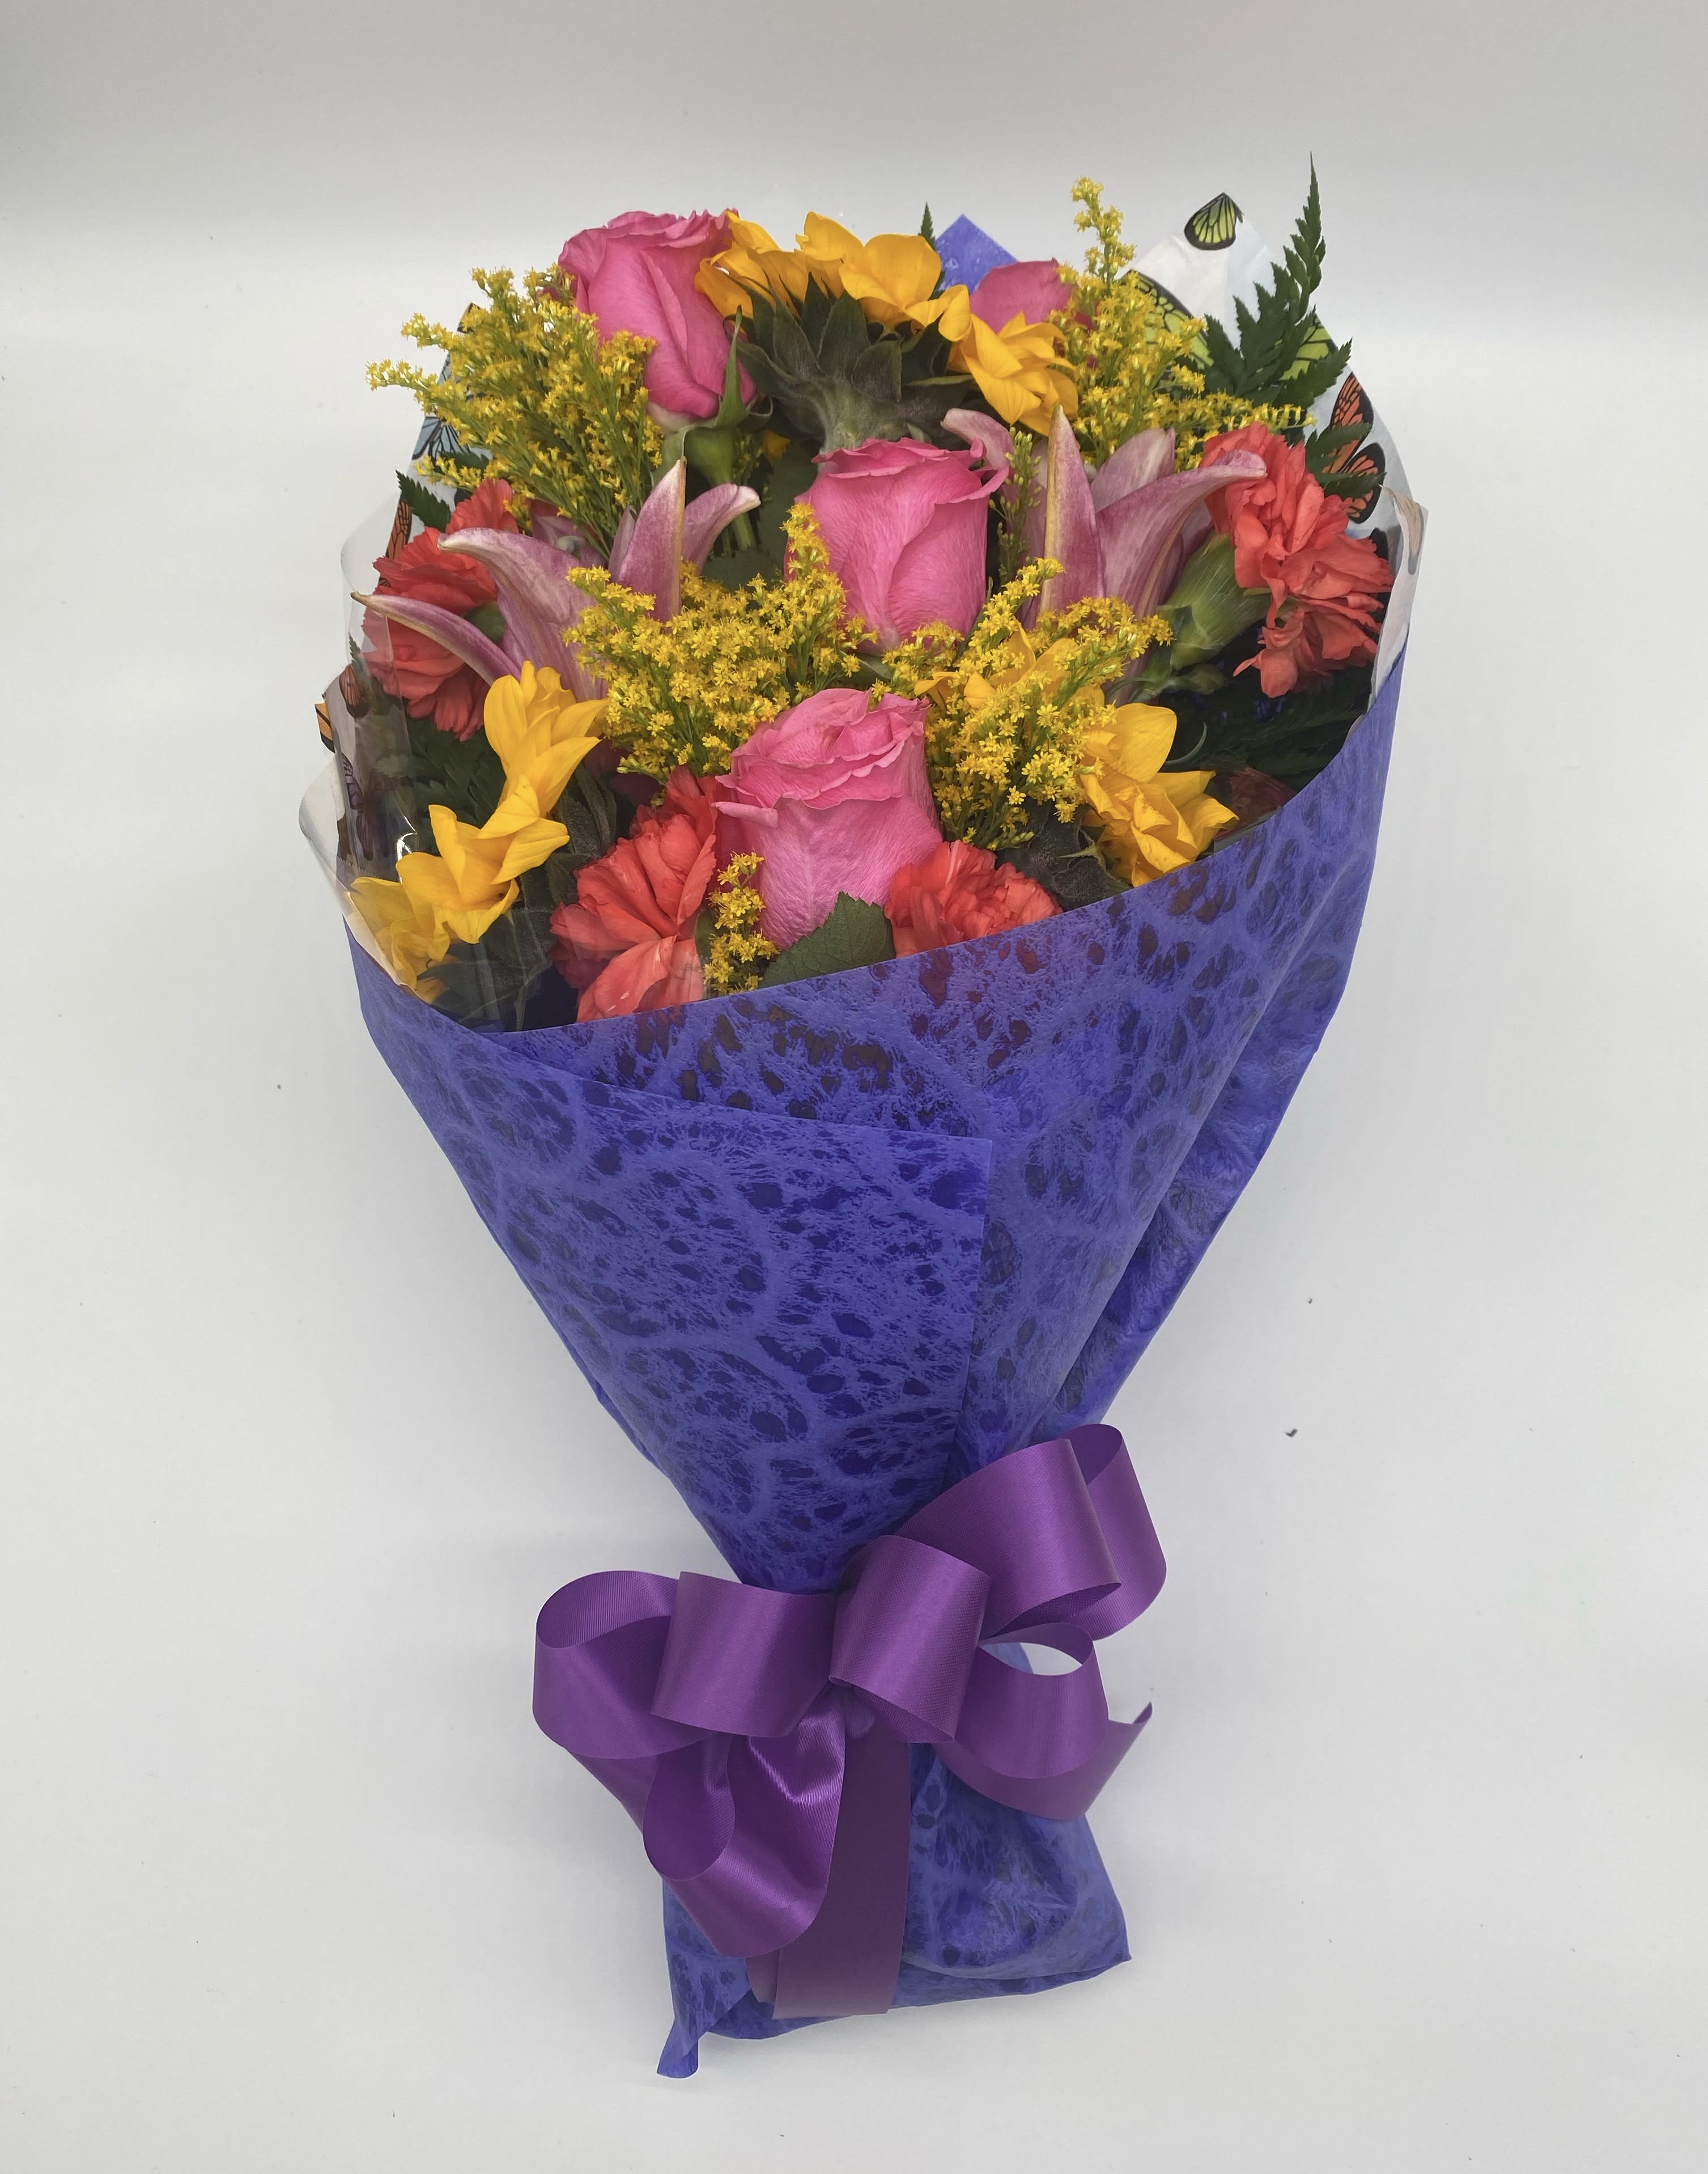 Stunning Wrapped Flower Bouquet in Las Vegas, NV